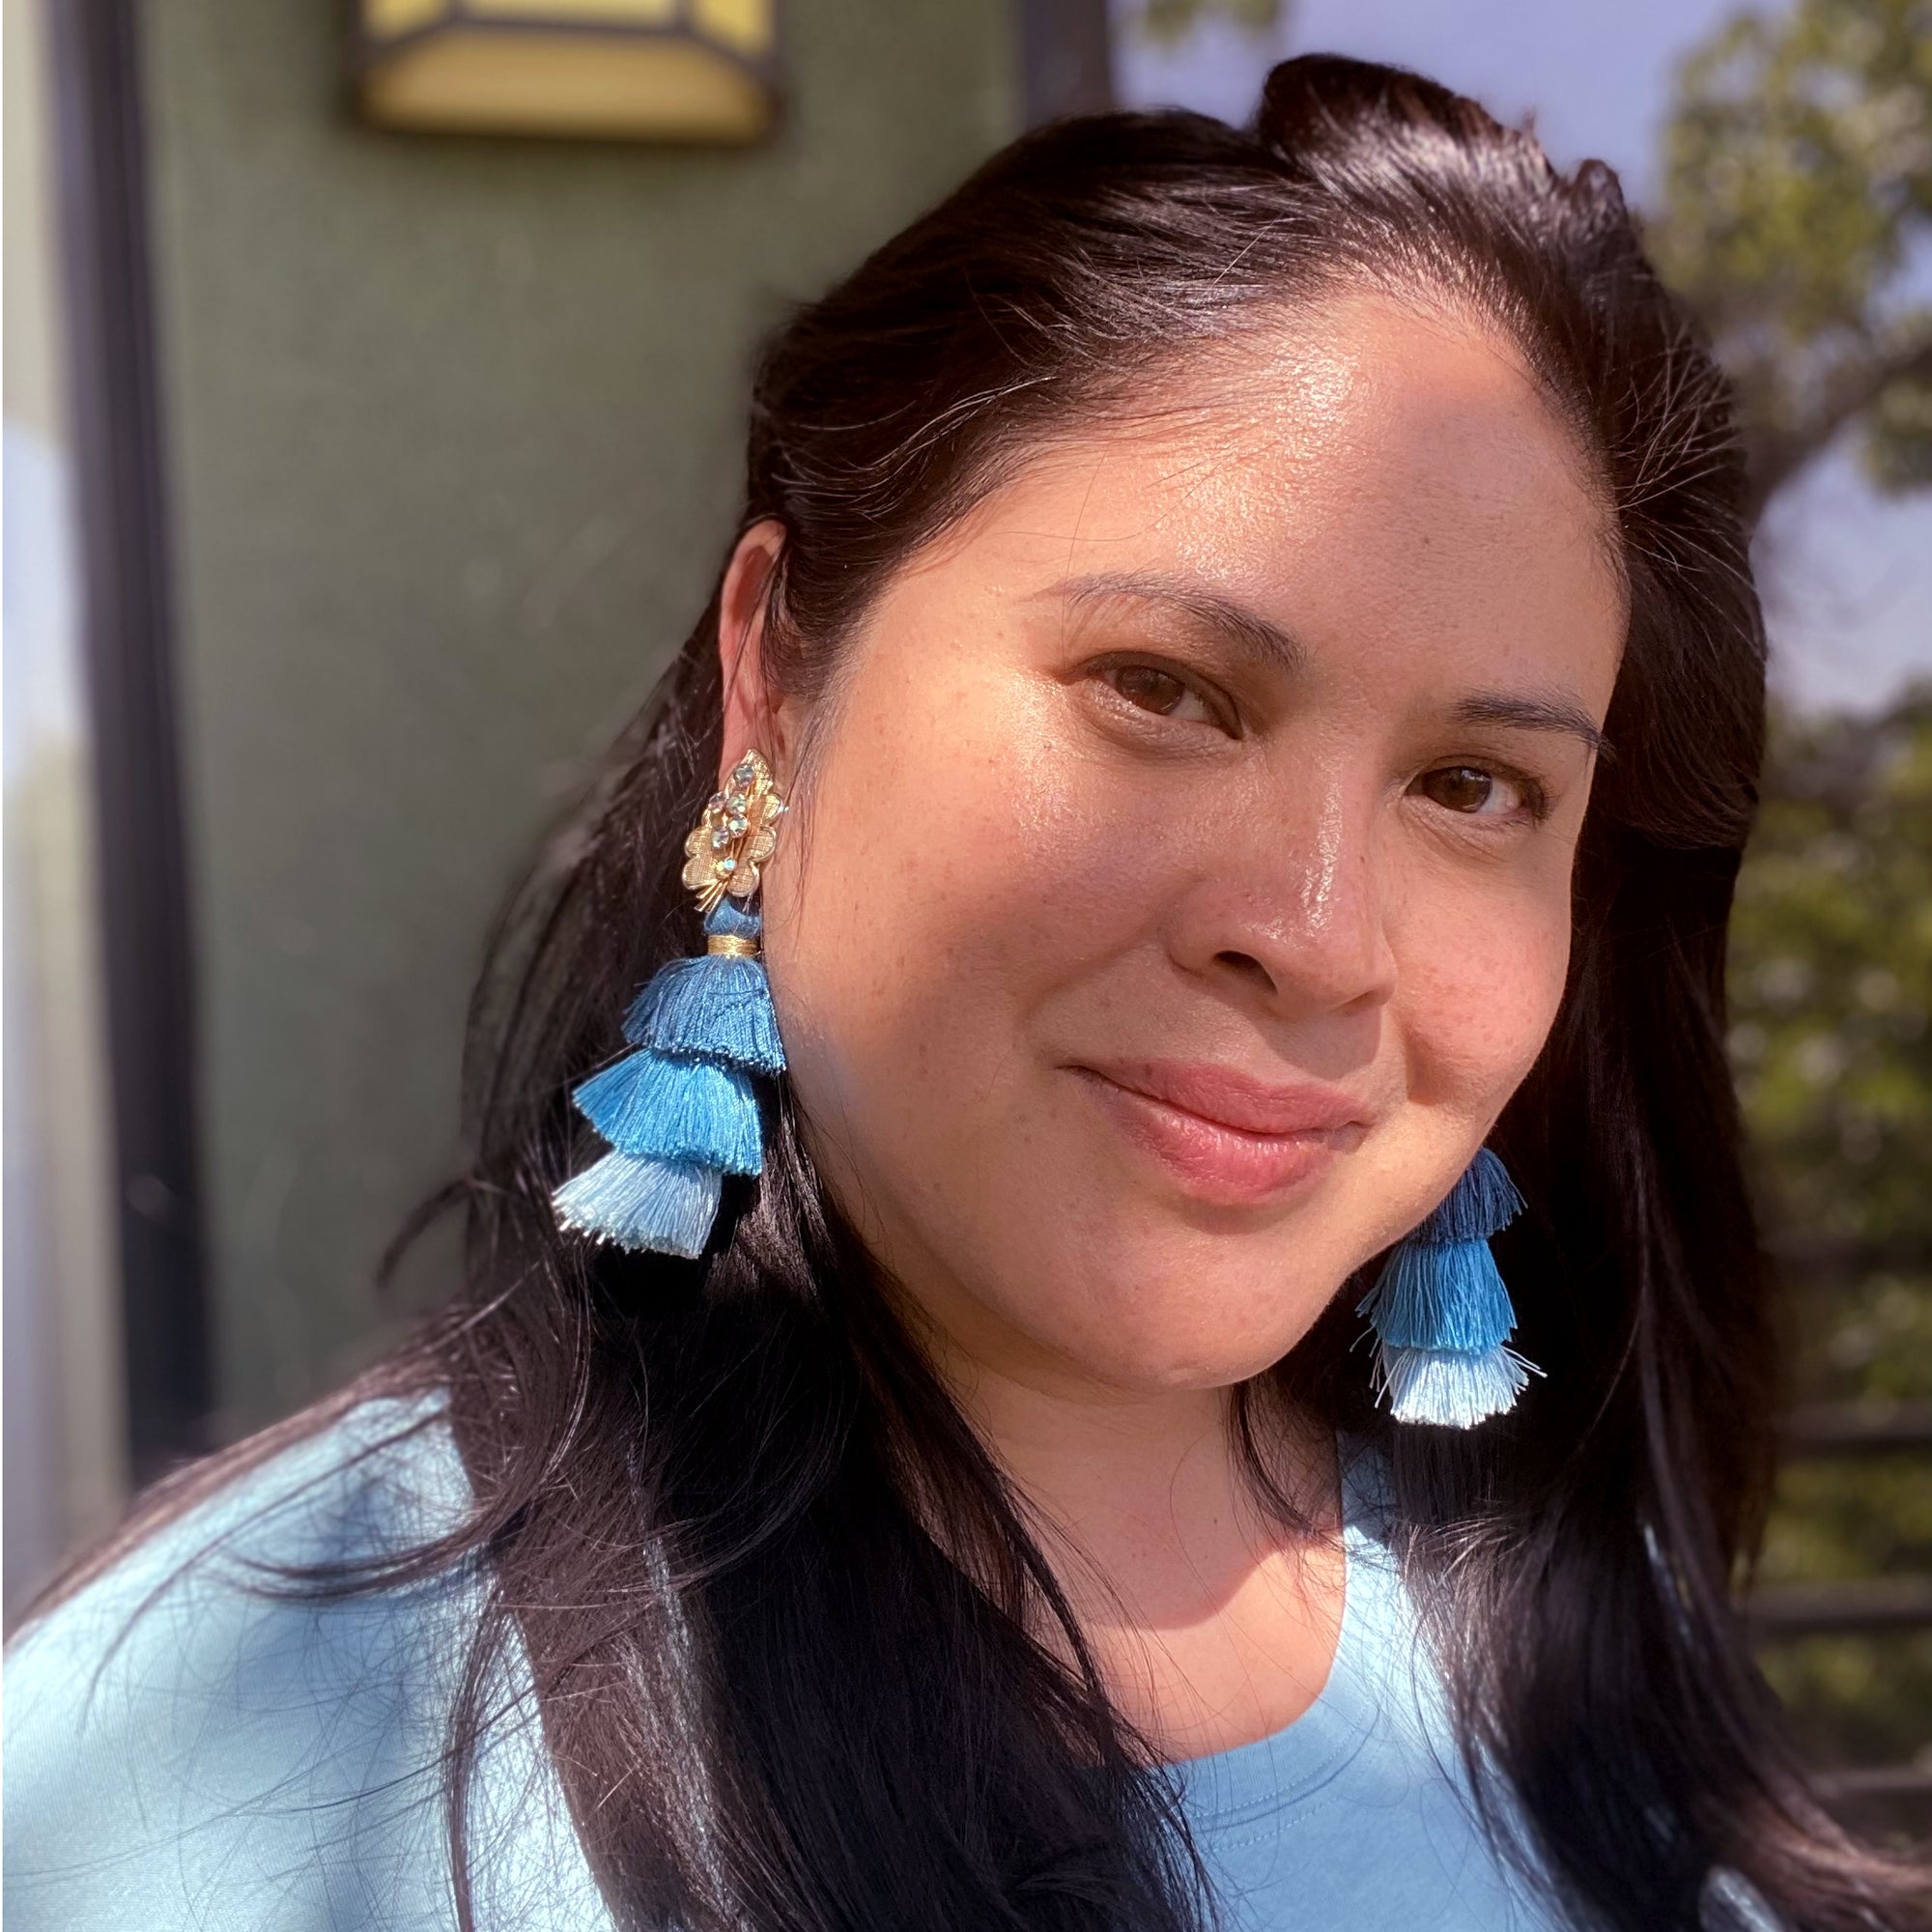 Jenny Dayco wearing iridescent leaf and blue tassel clip on earrings